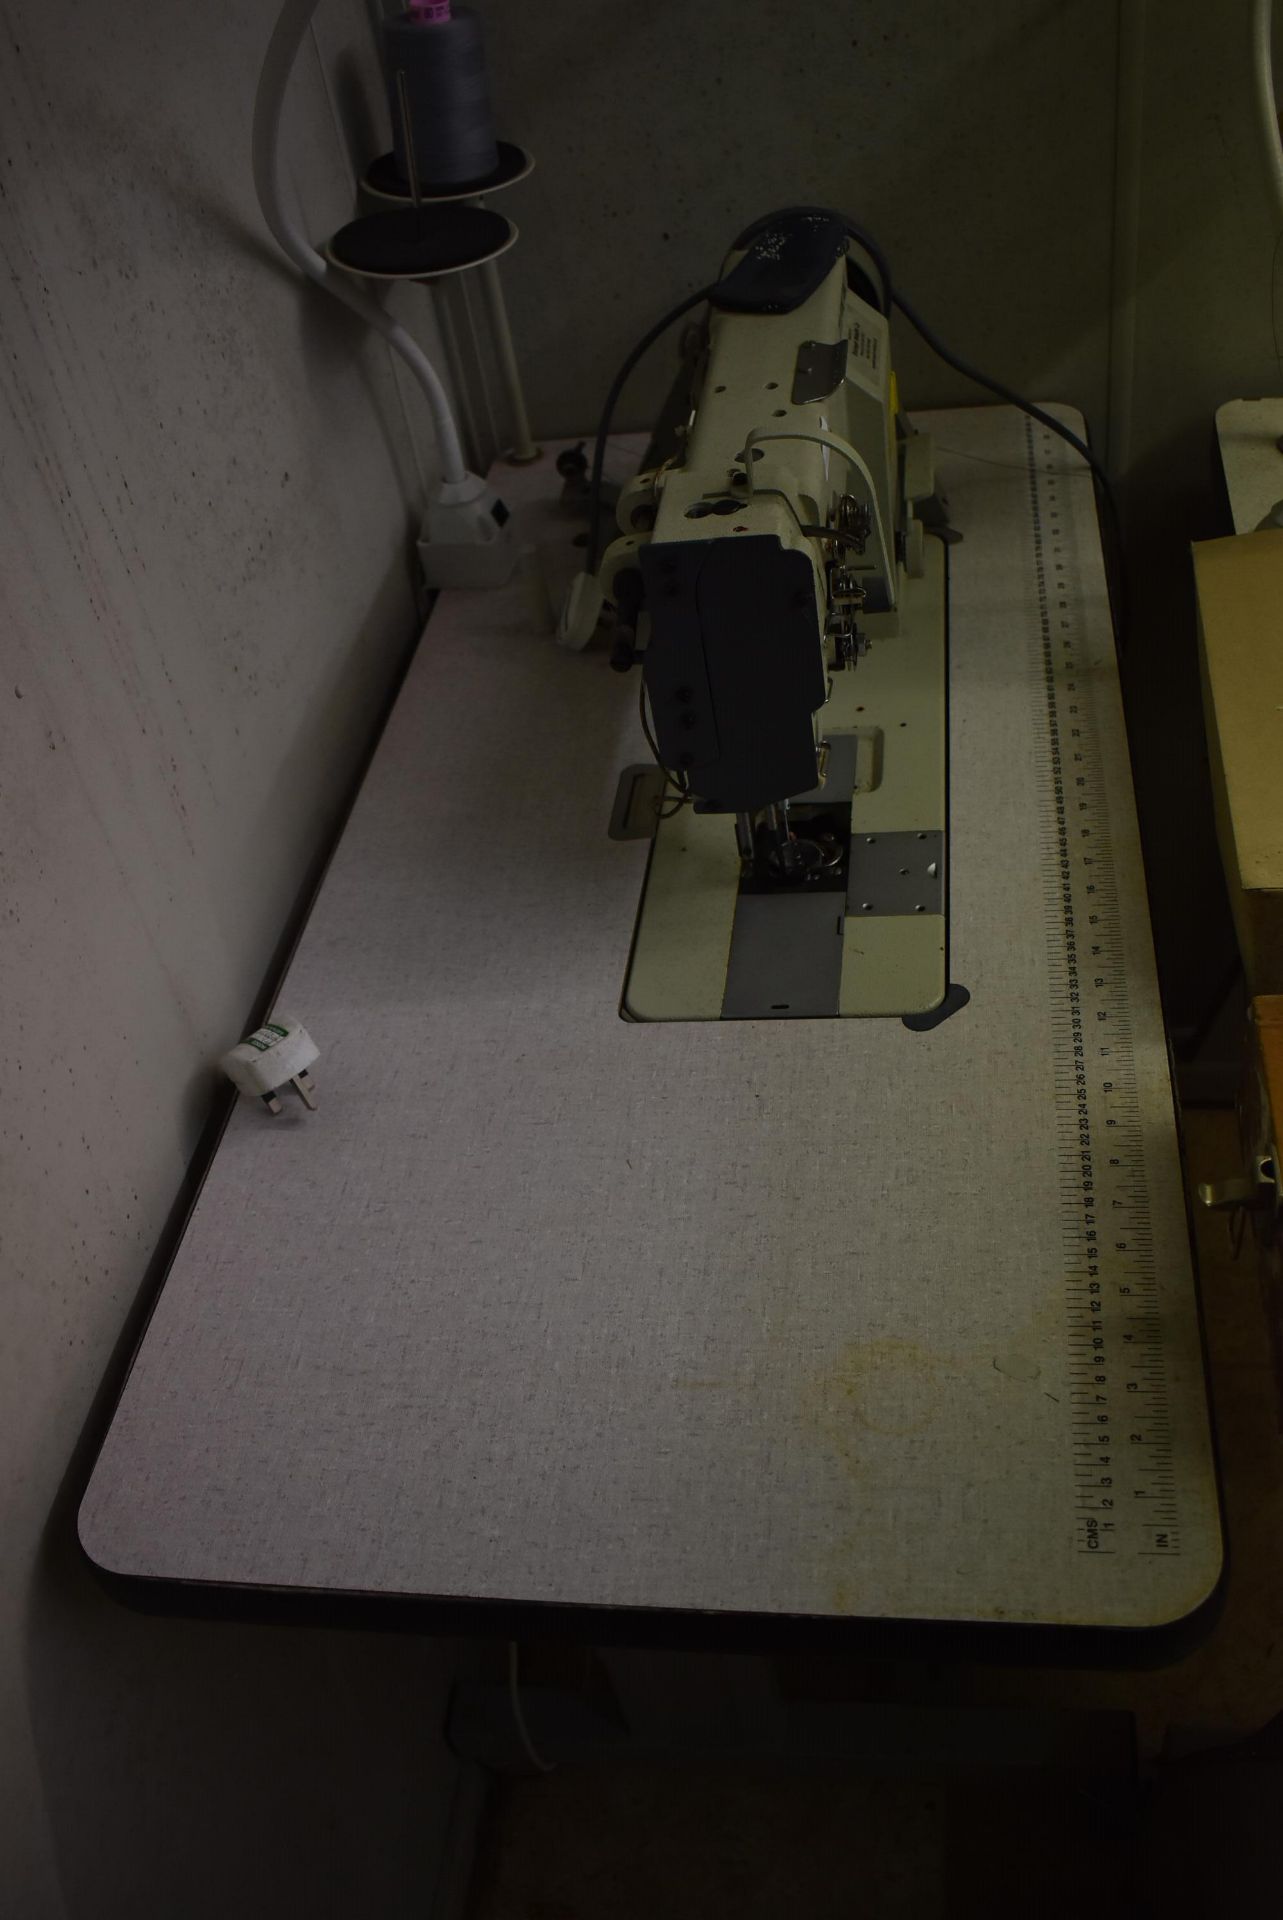 *Typical GC20606-1 Sewing Machine on Bench - Image 3 of 3